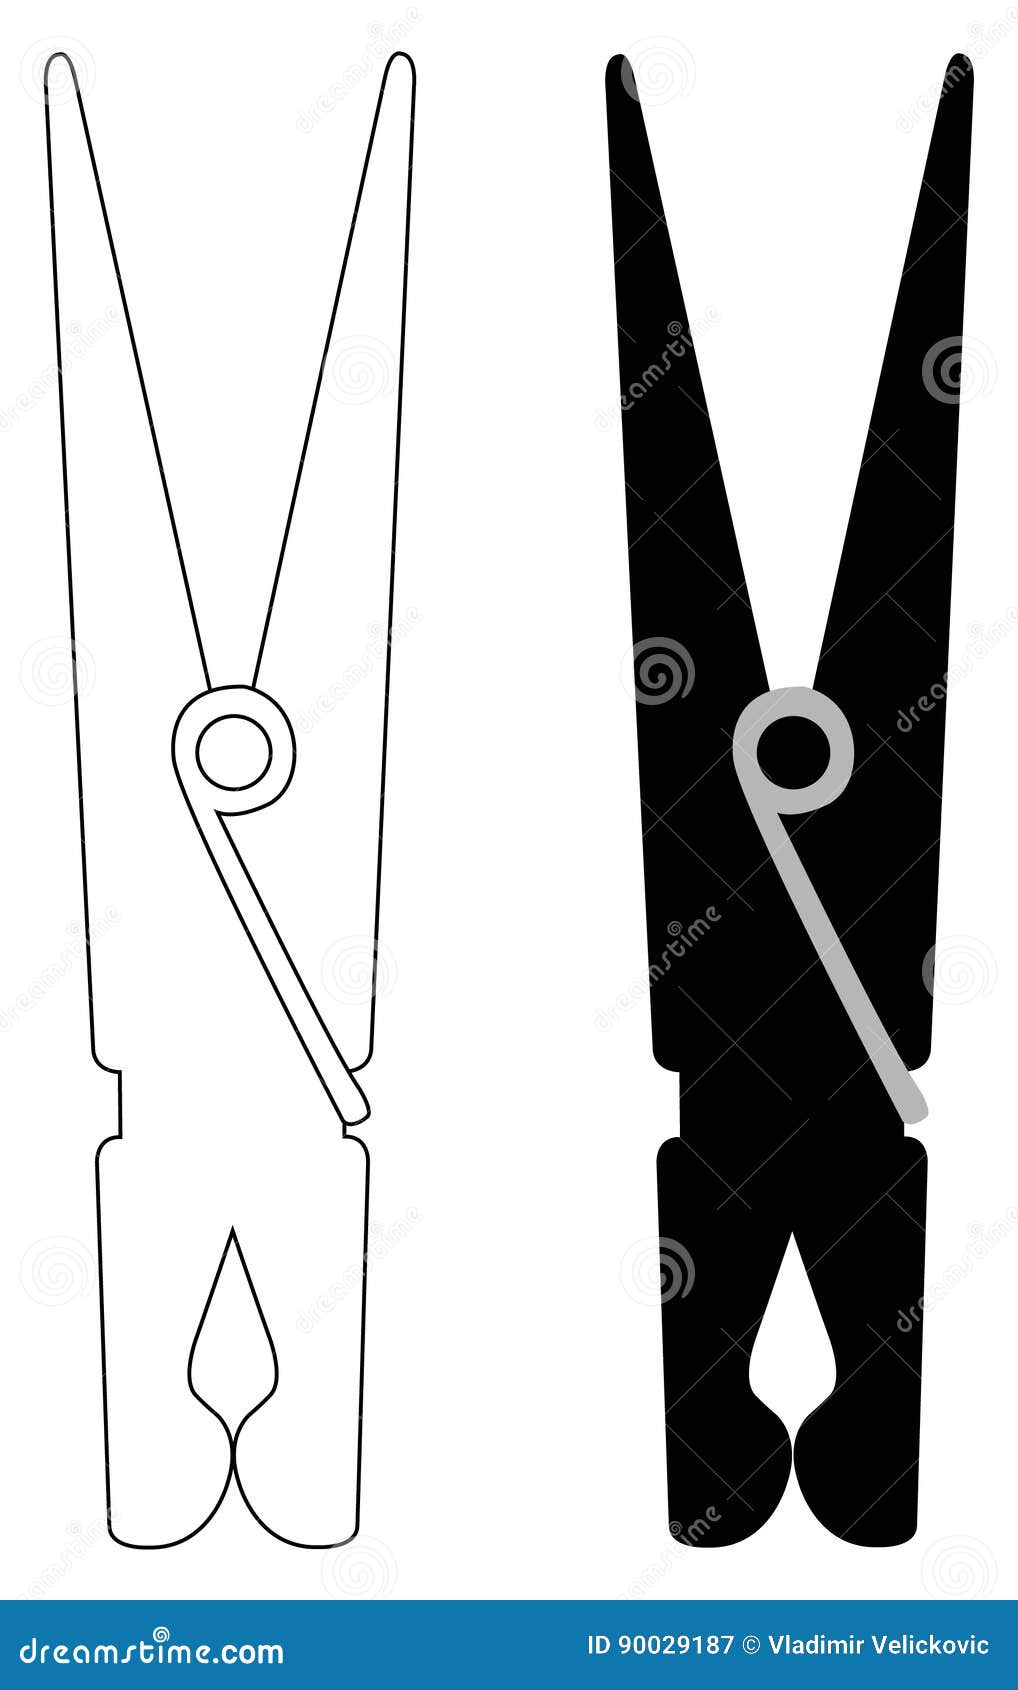 Clothes pin realistic wooden peg for housework Vector Image